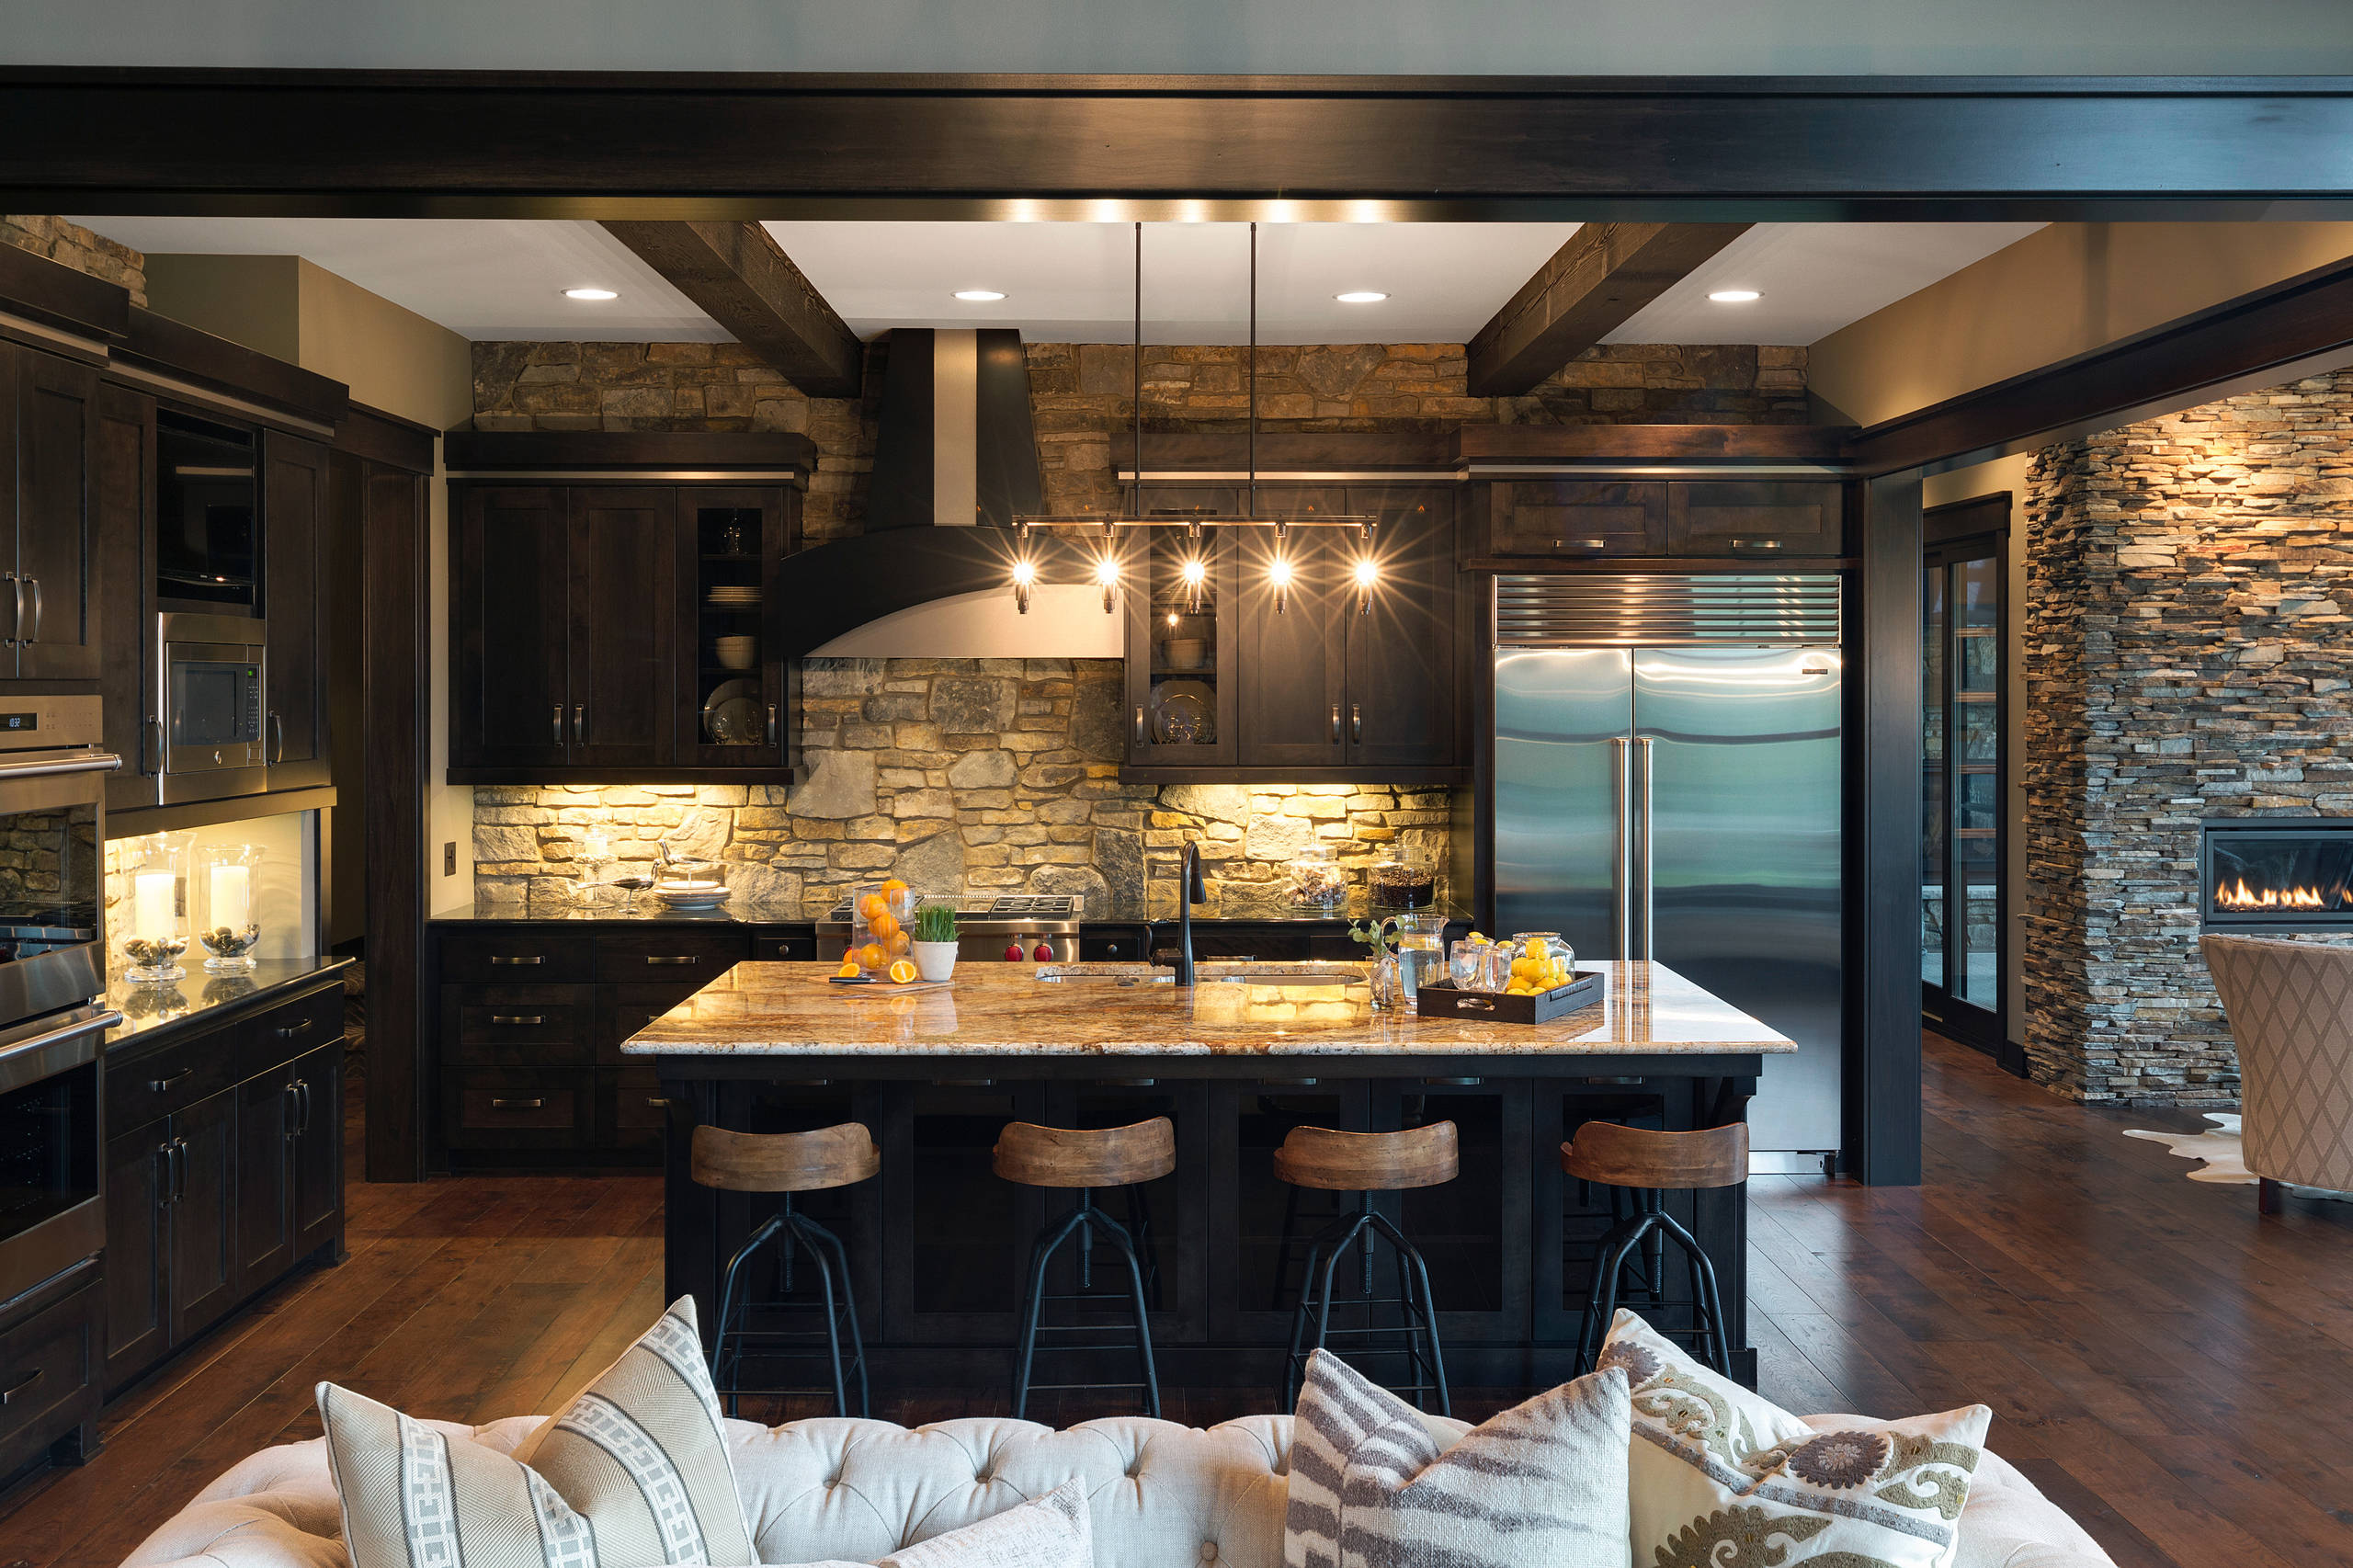 Country Interior Design: A Rustic Touch Of Comfort